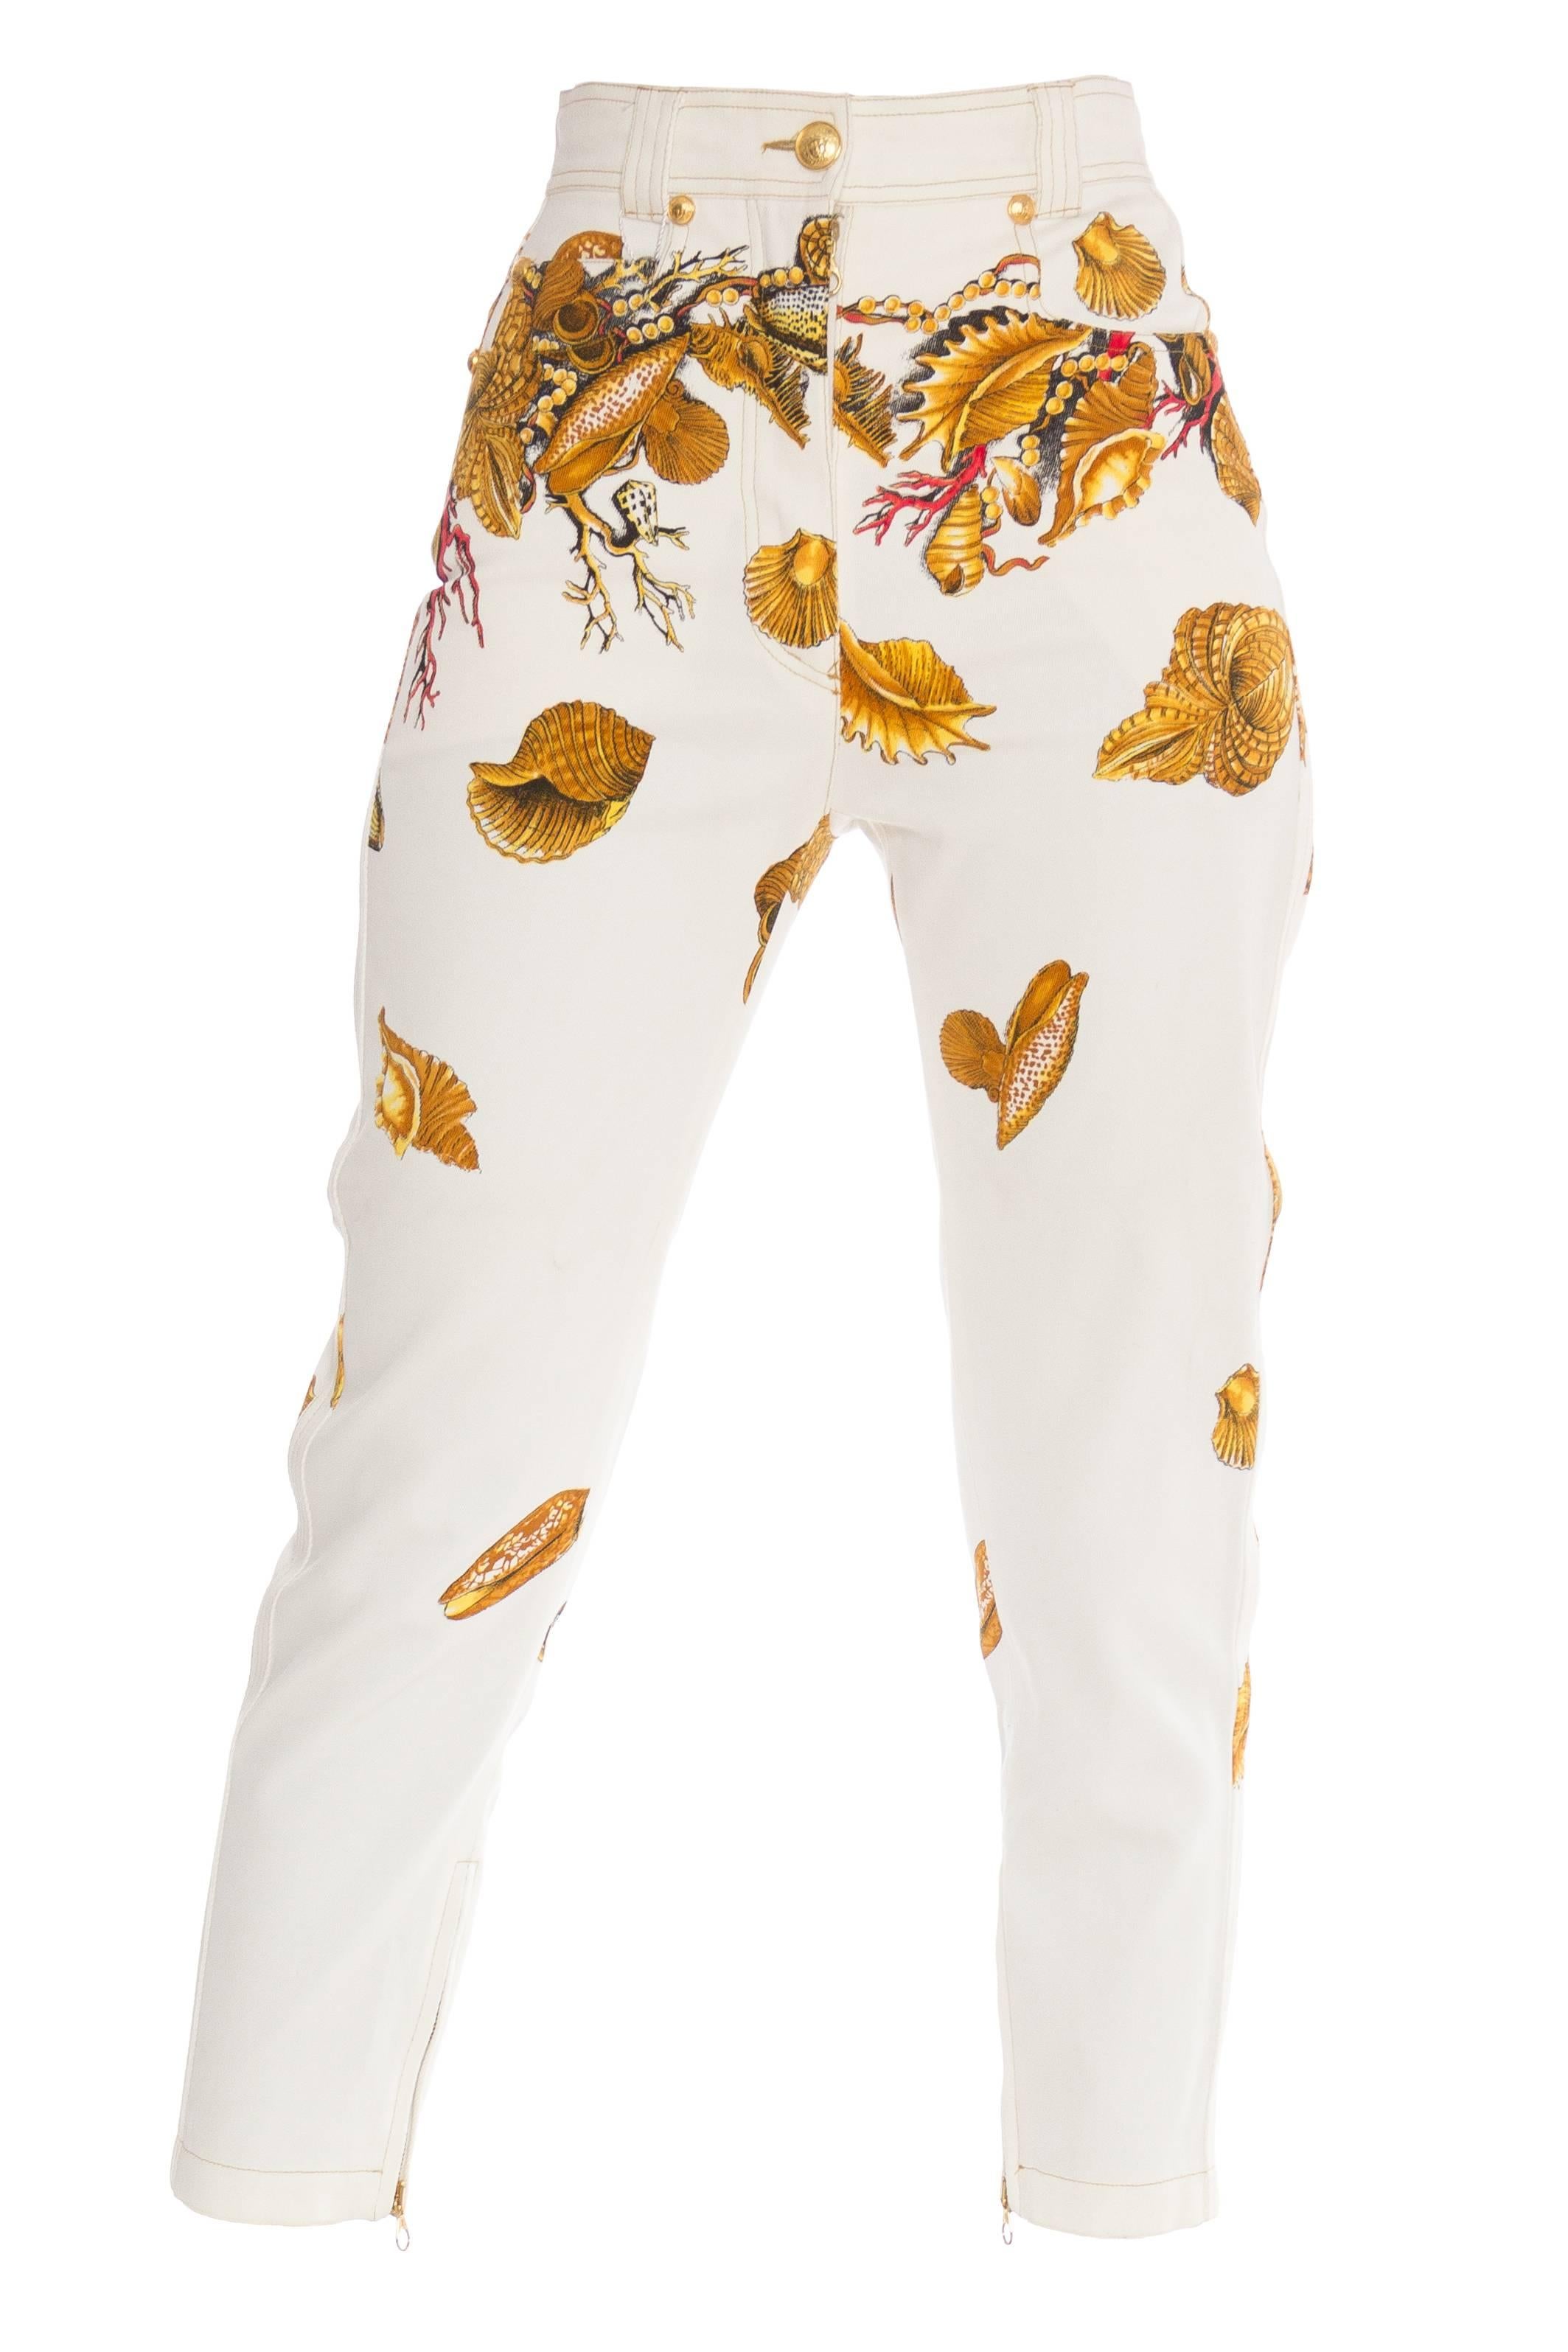 From the famous seashell and coral collection, these pristine white denim capris are stunners. Rendered in gold on white with gold zippers at the cuffs. Gold medusa button and rivets. Woven with a touch of stretch the high-waisted cut is so hot